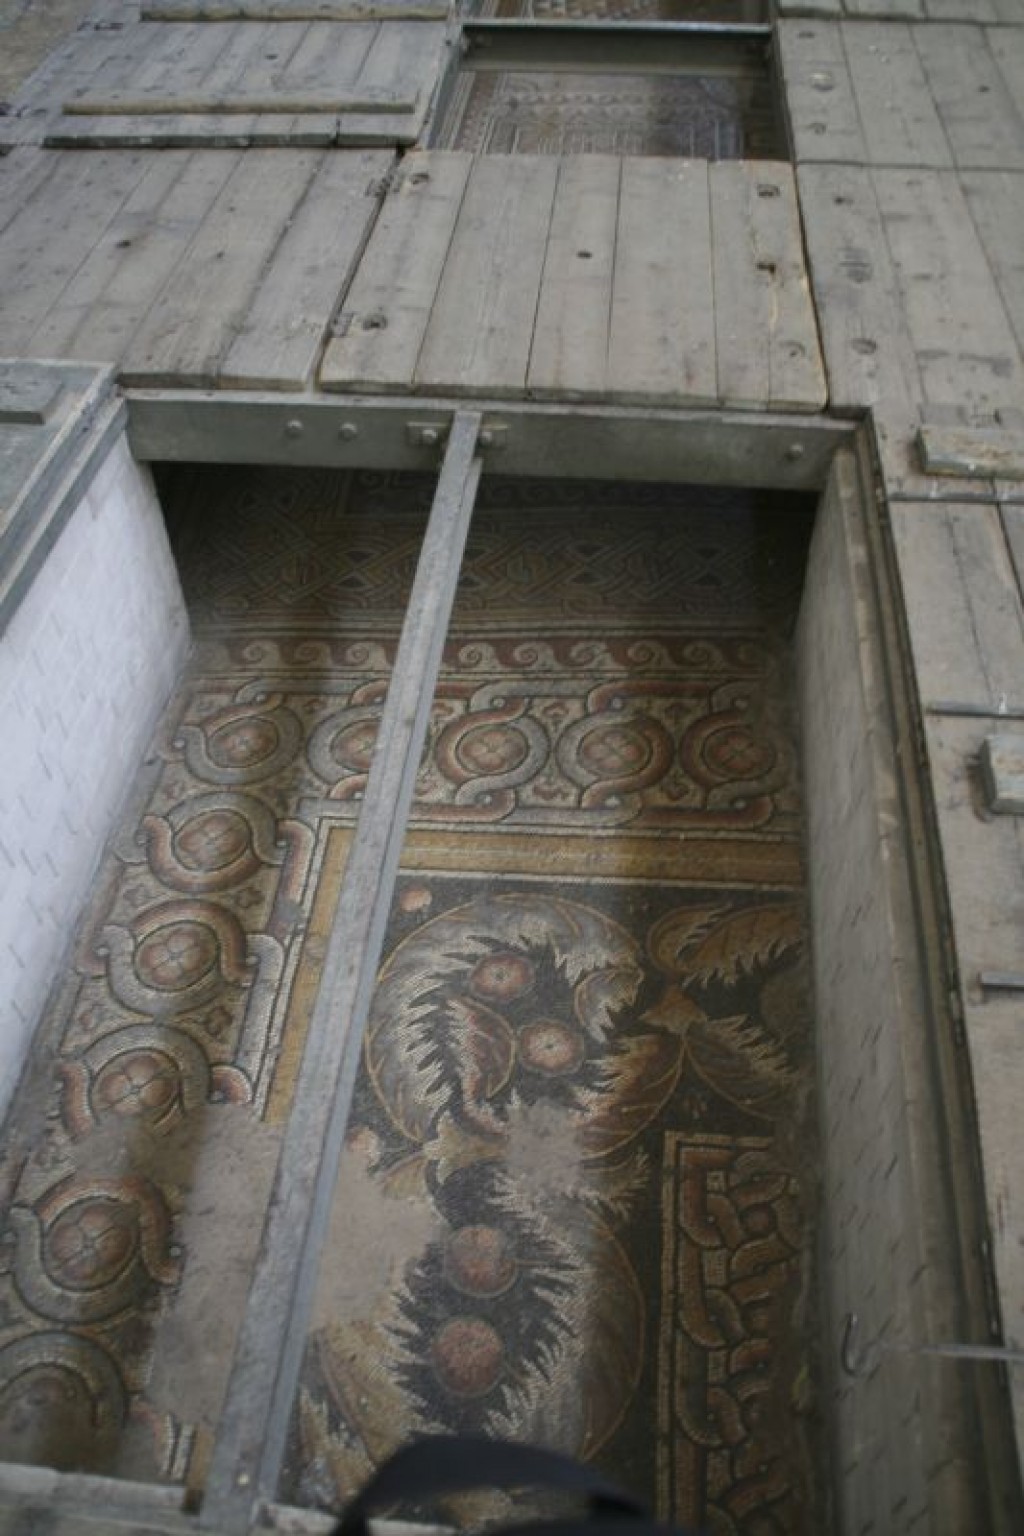 More of Constantine's 4th century mosaic floor rediscovered in 1934 in the Church of the Nativity (Basilica of the Nativity).